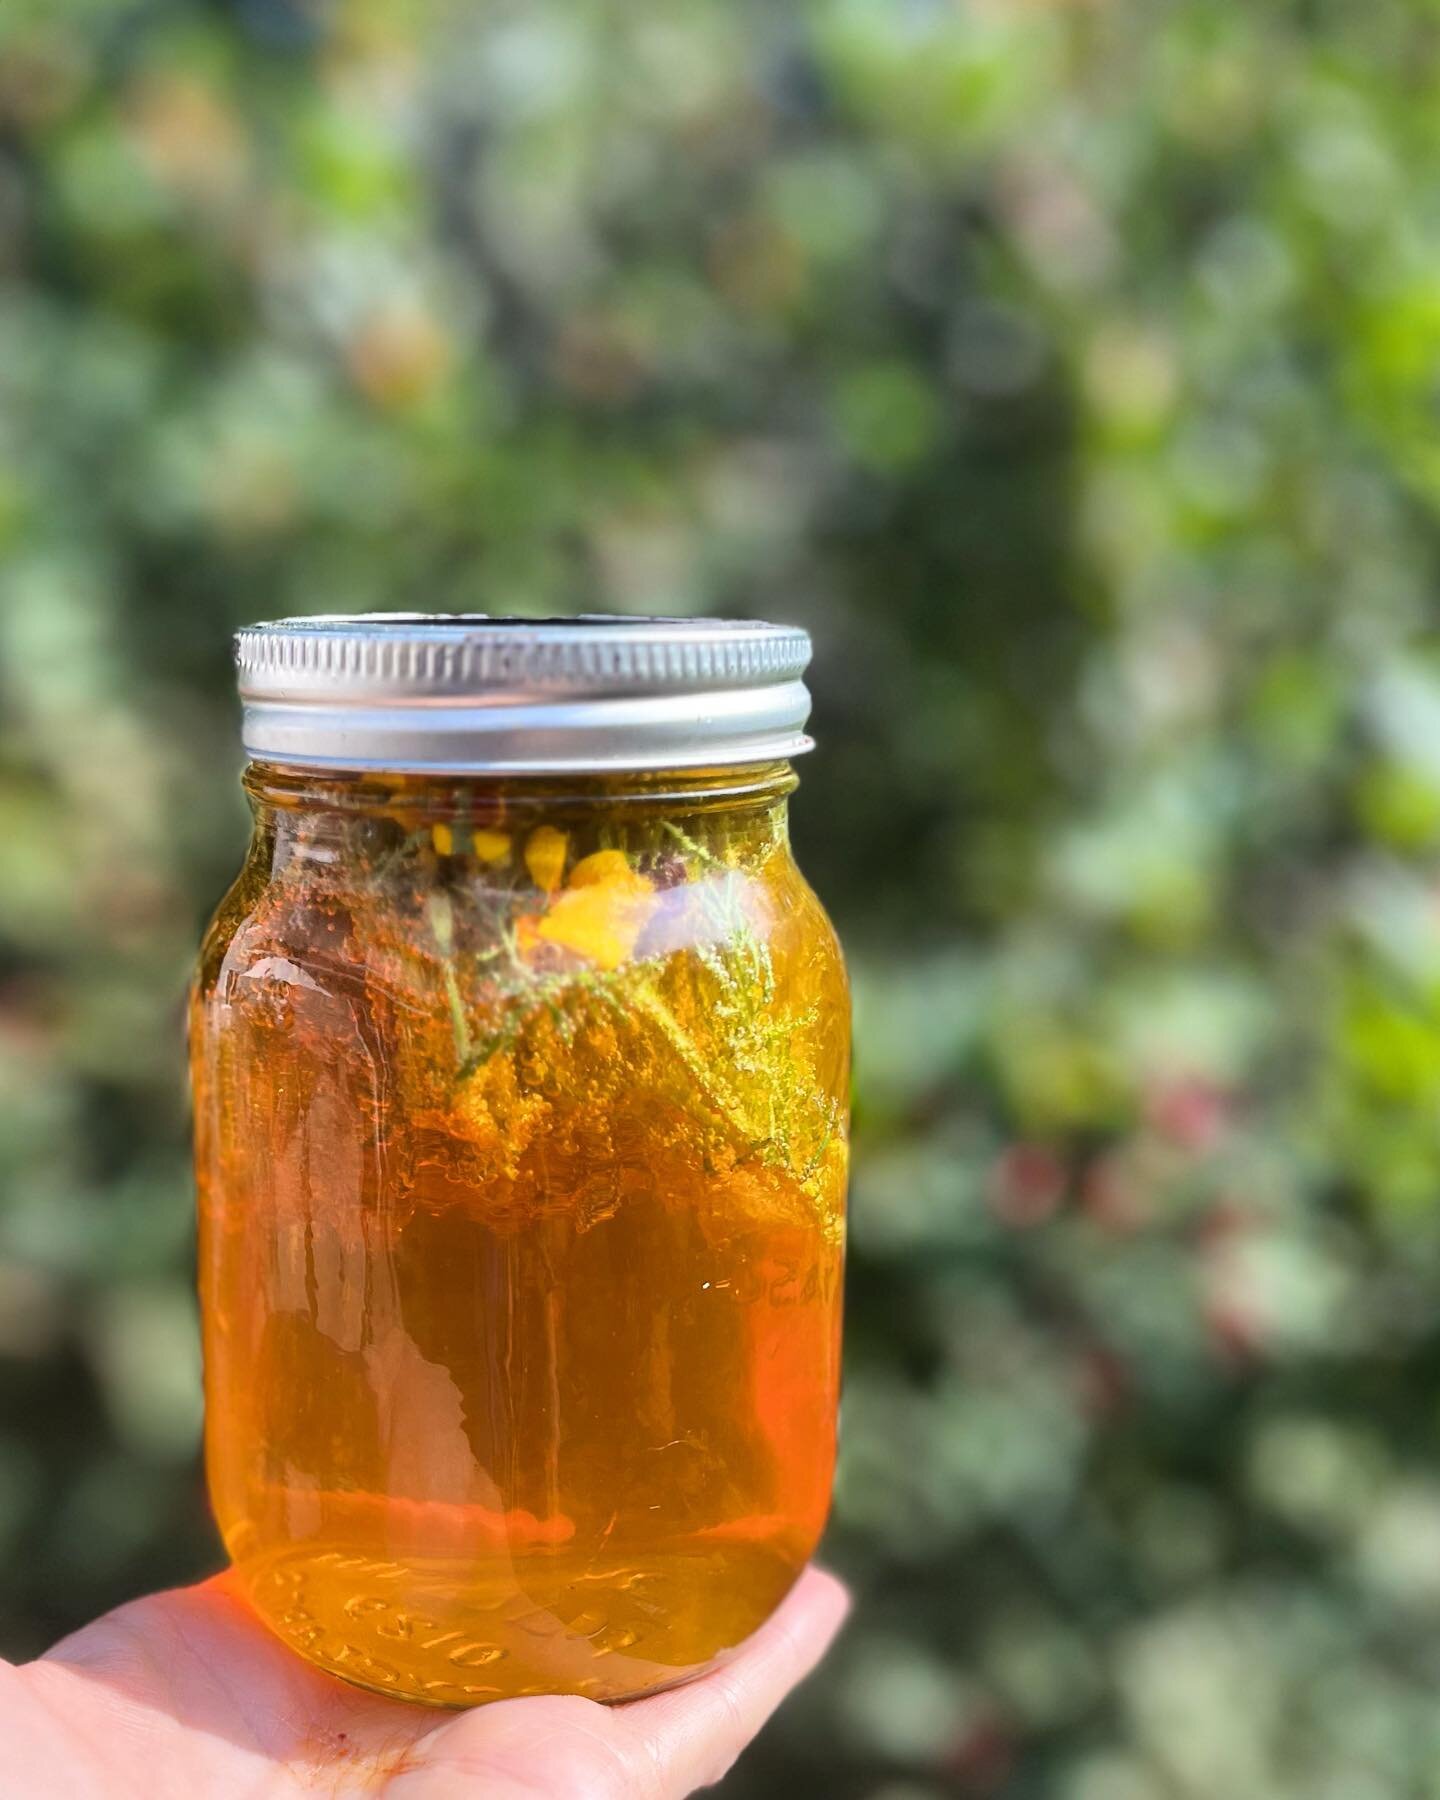 Second fermenting kombucha with edible flowers. Single ingredient or combined with fruits, it&rsquo;s a lovely way to enjoy your flowers. 

#edibleflowers #tangerinegem #marigold #kombucha #fermentation #floracocina #eatflowersbekind #flowersinfood